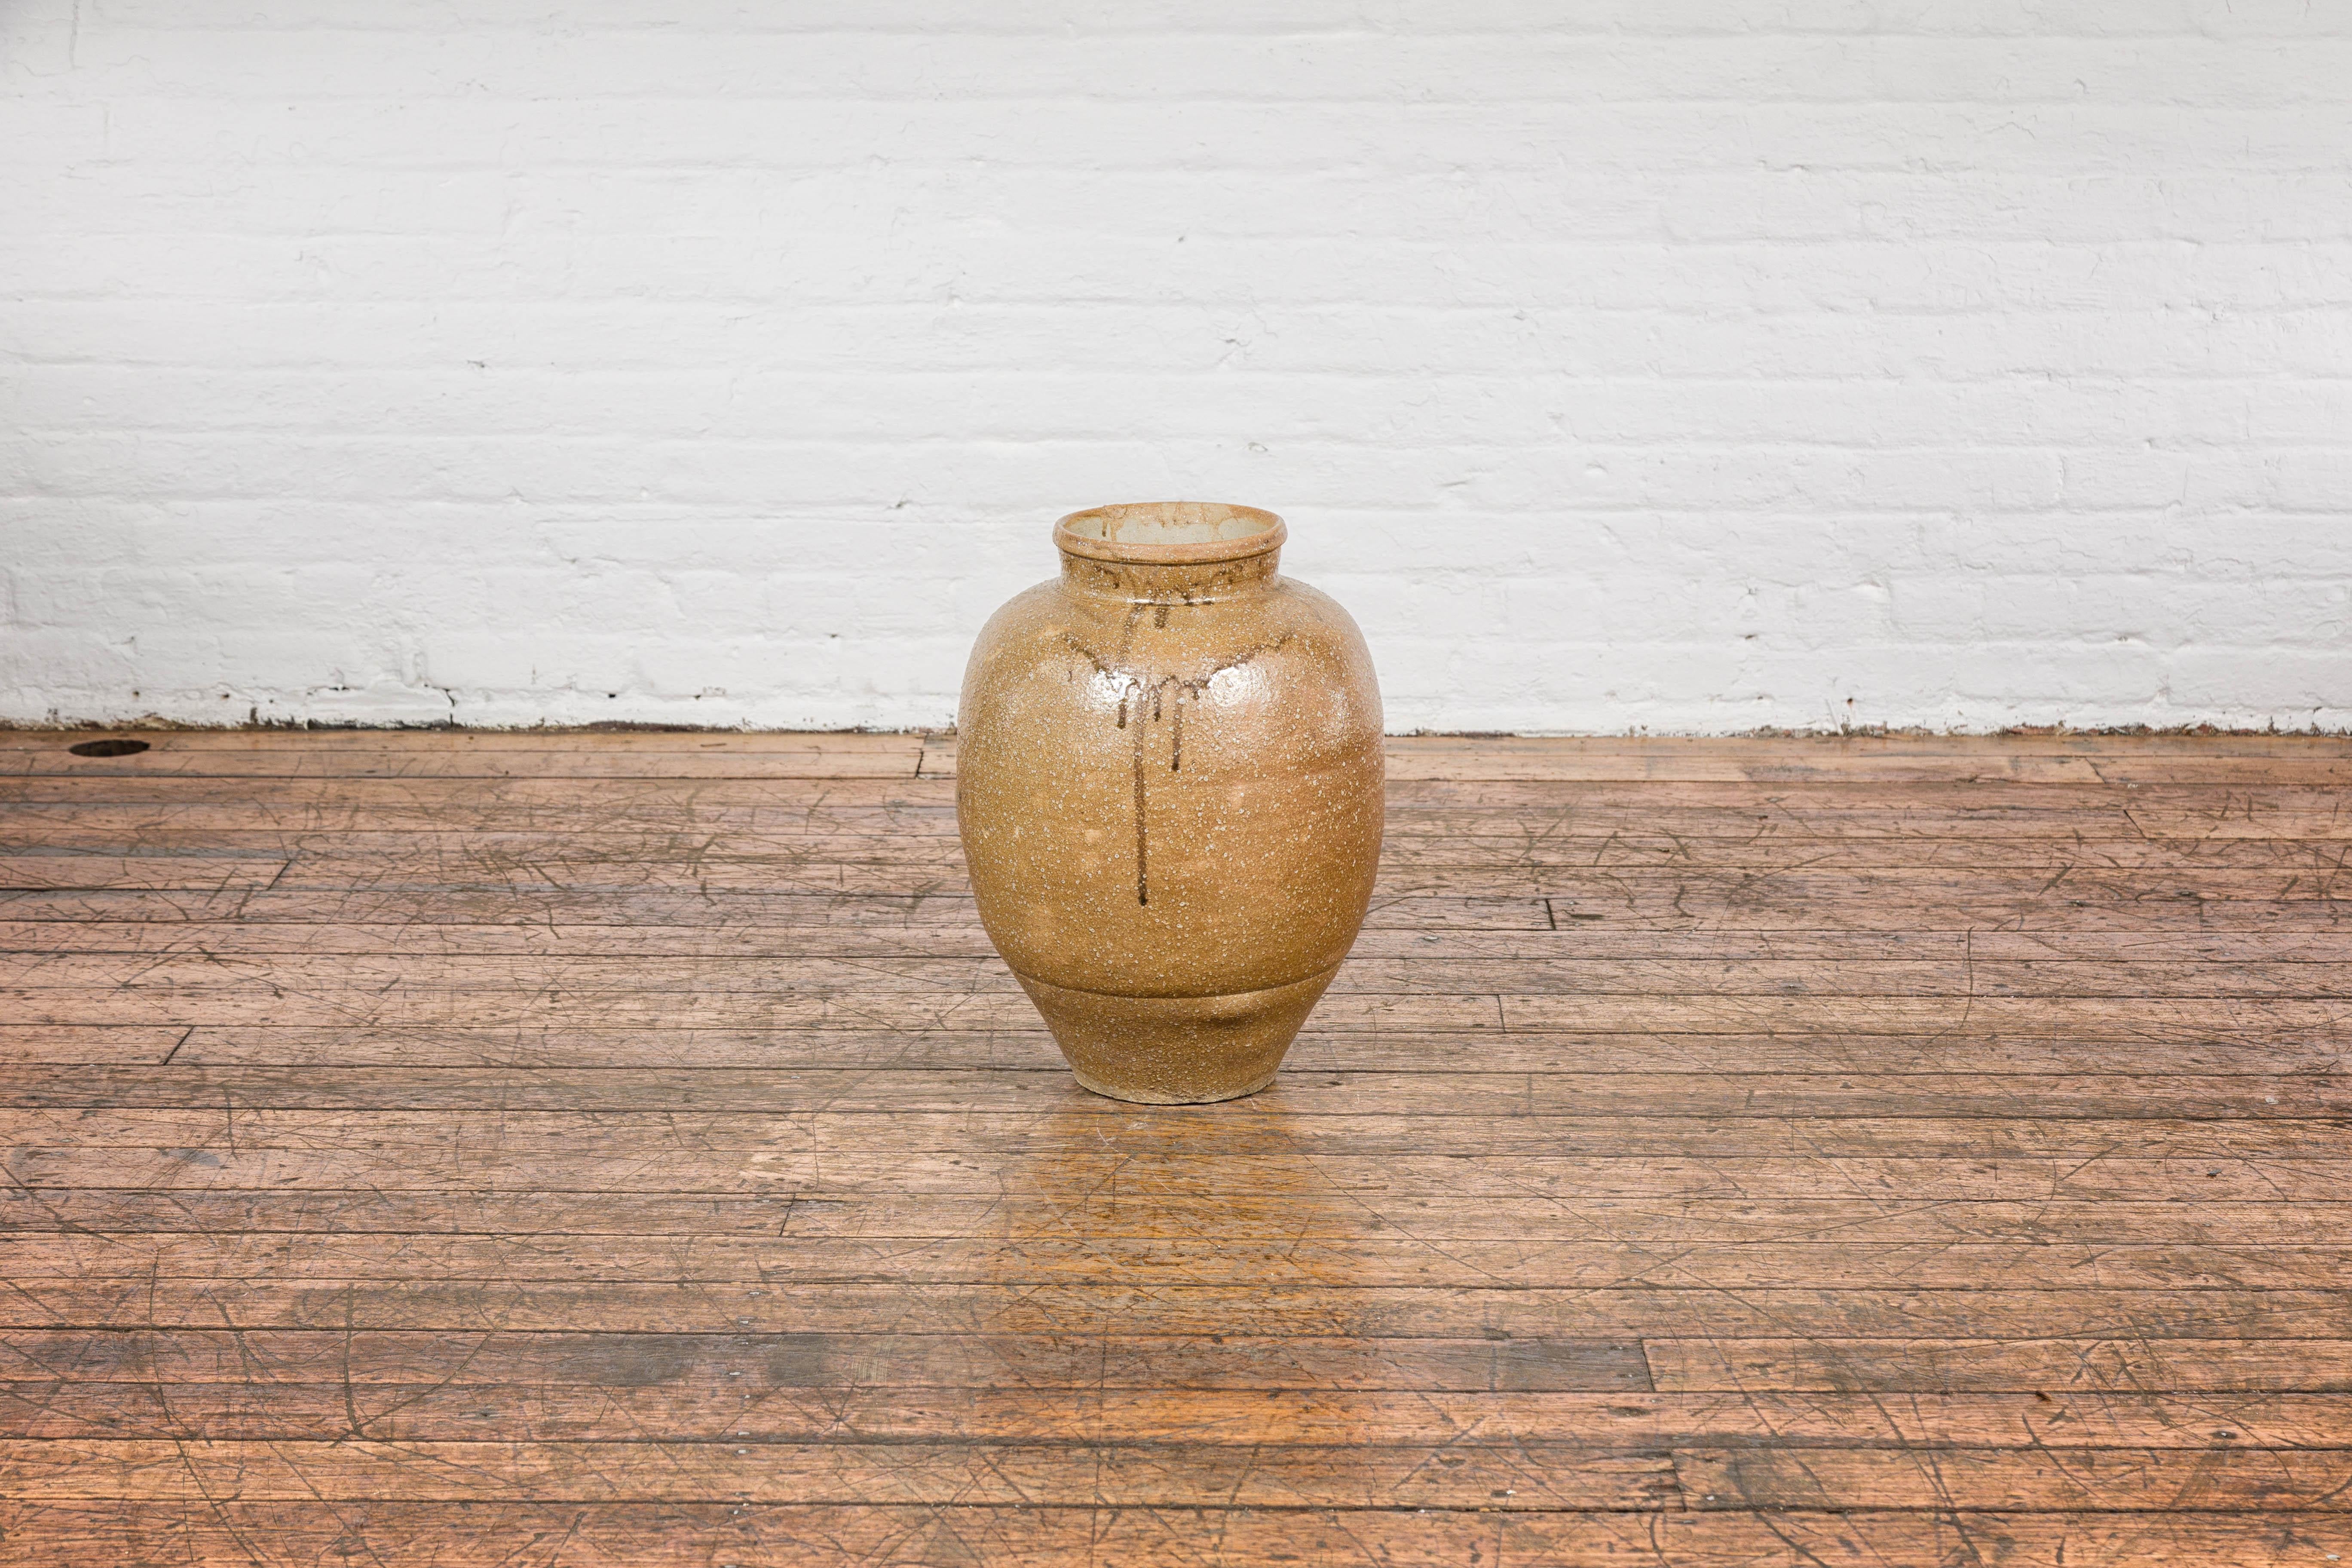 Japanese Taishō Period Sand Glaze Vase with Dripping Finish, circa 1900 In Good Condition For Sale In Yonkers, NY